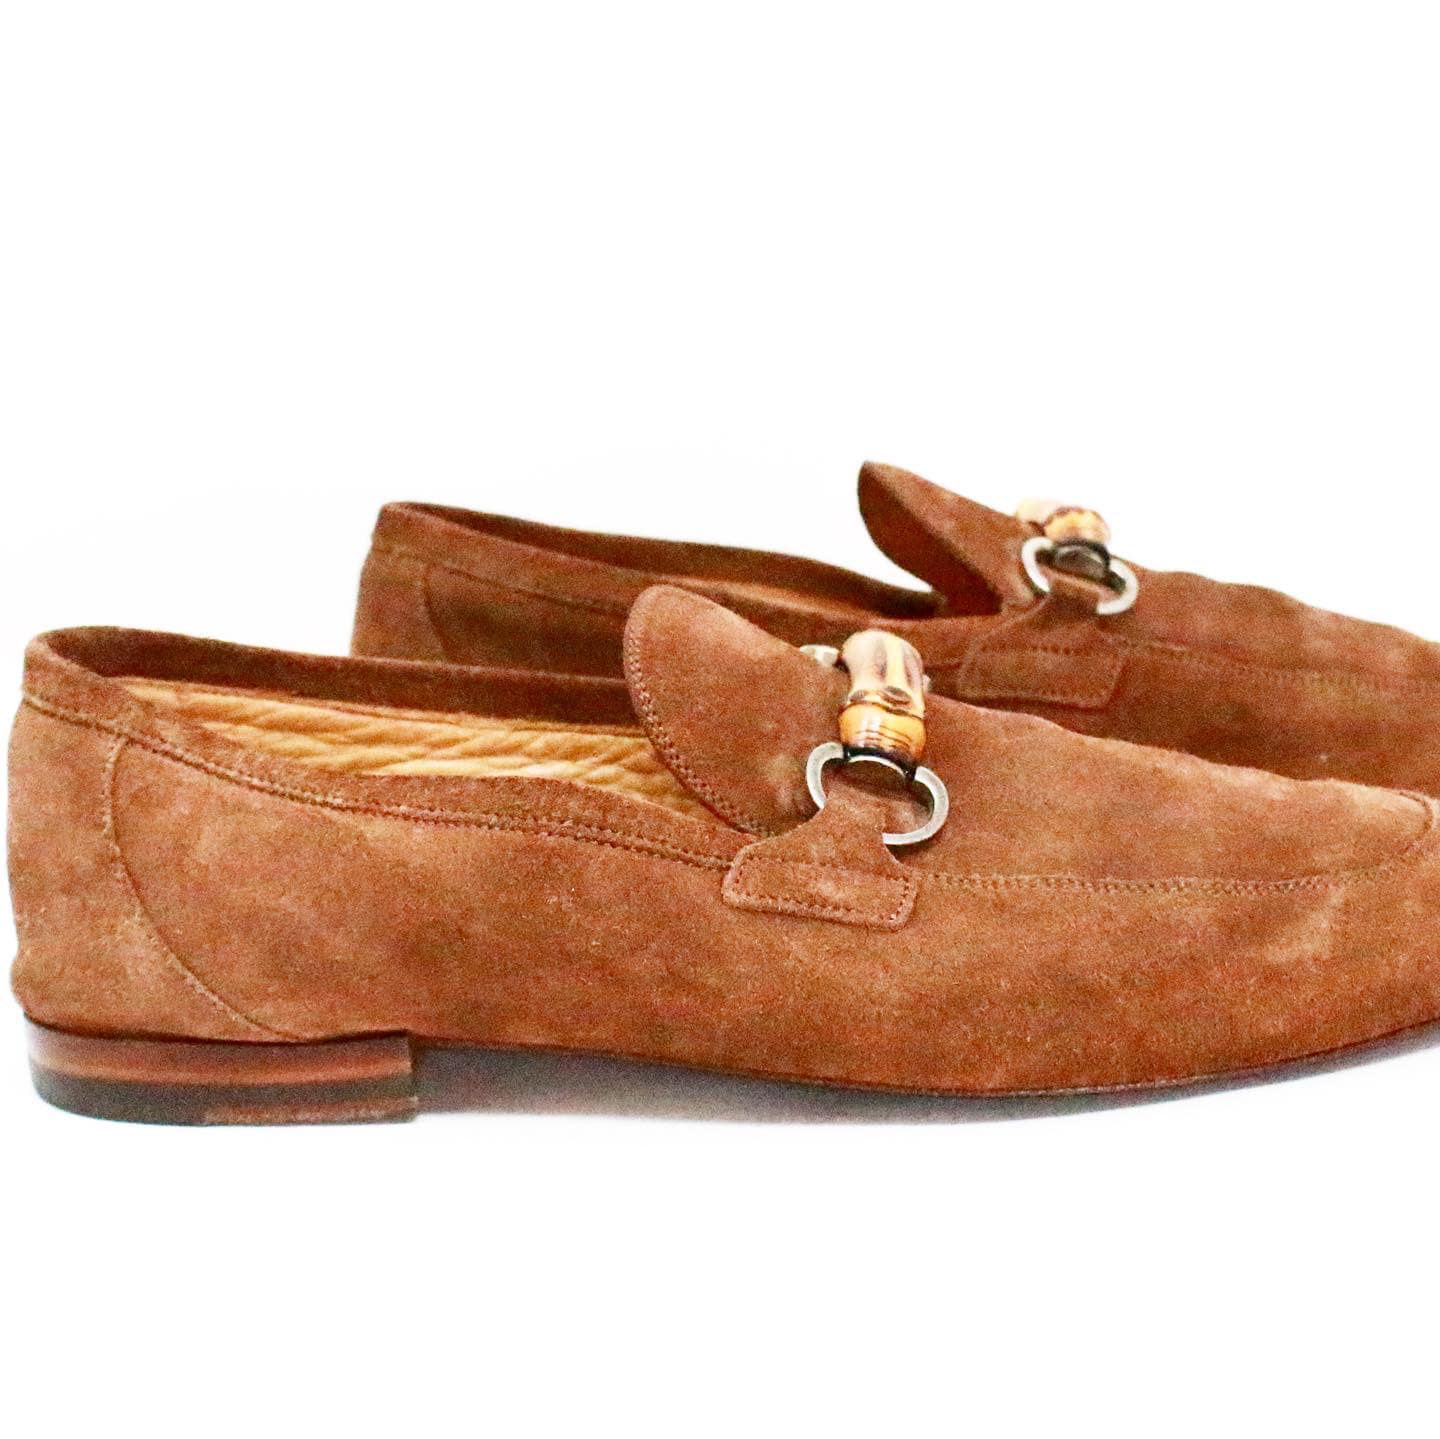 Gucci Mens Jordaan Suede Loafers item #40494 – ALL YOUR BLISS